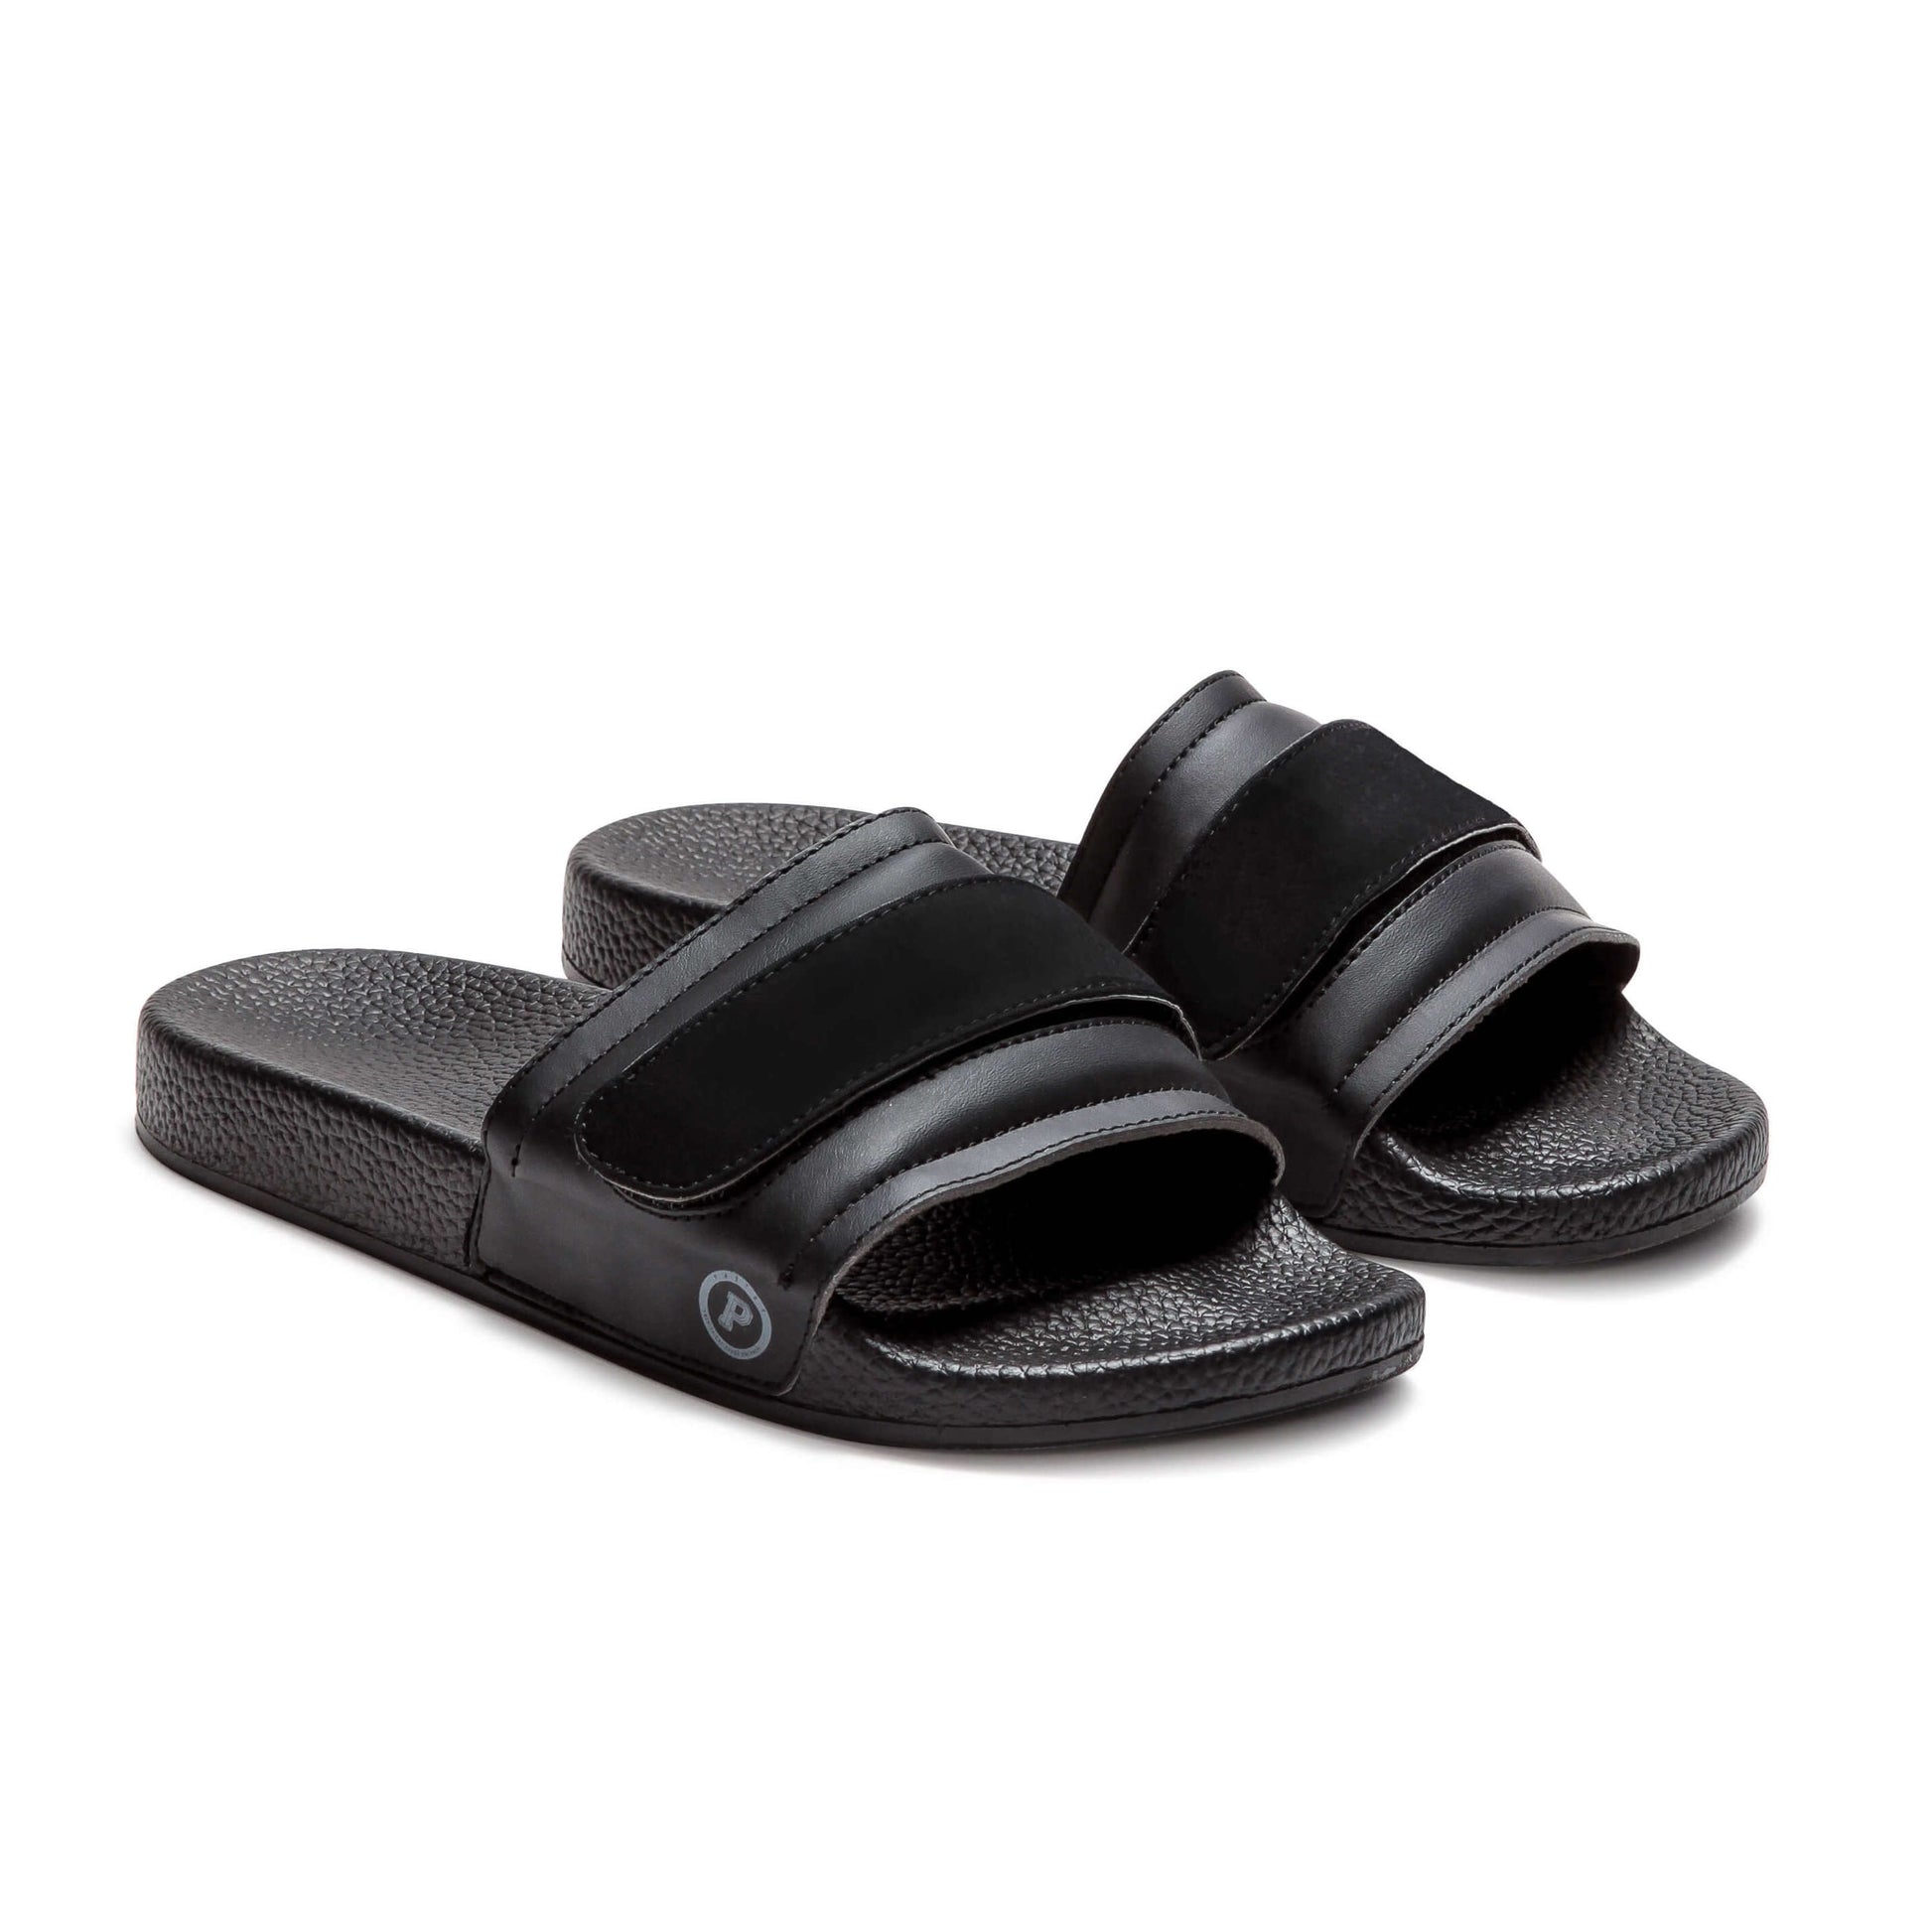 Pair of Pastry Adult Women's Recovery Slide in Black with Blank Straps in 3 quarter view